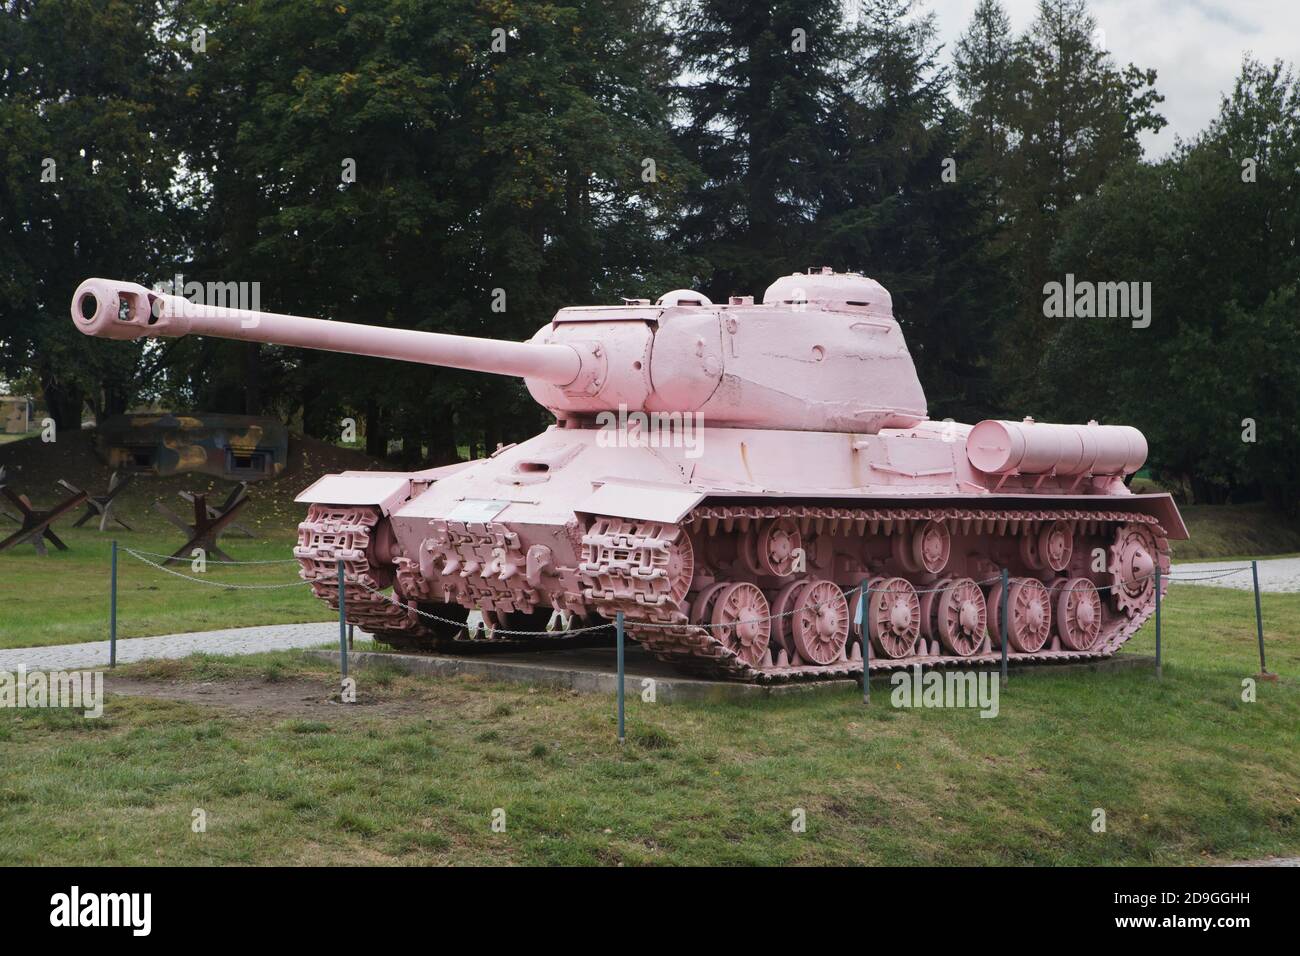 Soviet heavy tank IS-2 commonly known as the Pink Tank painted pink by Czech visual artist David Černý on display on the Military Technical Museum (Vojenské technickém muzeum) in Lešany, Czech Republic. The tank formerly known as No 23 used to be the Monument to Soviet Tank Crews in Prague, Czechoslovakia. It was controversially painted pink by art student David Černý and friends in April 1991 and later moved to the museum. The model IS-2 was named after Soviet dictator Joseph Stalin. Stock Photo